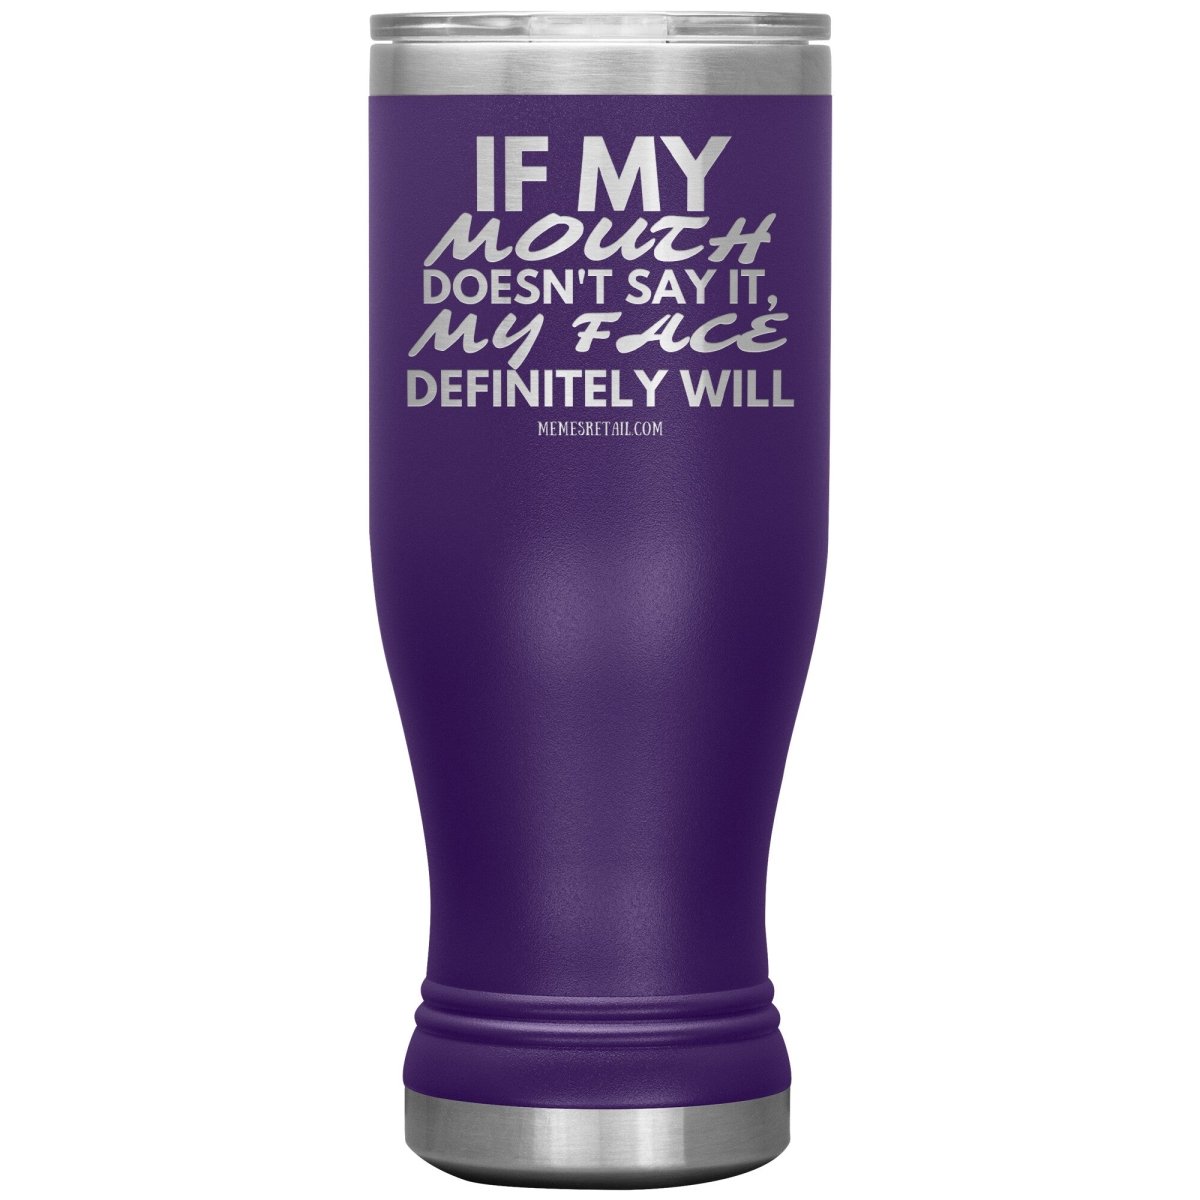 If my mouth doesn't say it, my face definitely will Tumblers, 20oz BOHO Insulated Tumbler / Purple - MemesRetail.com